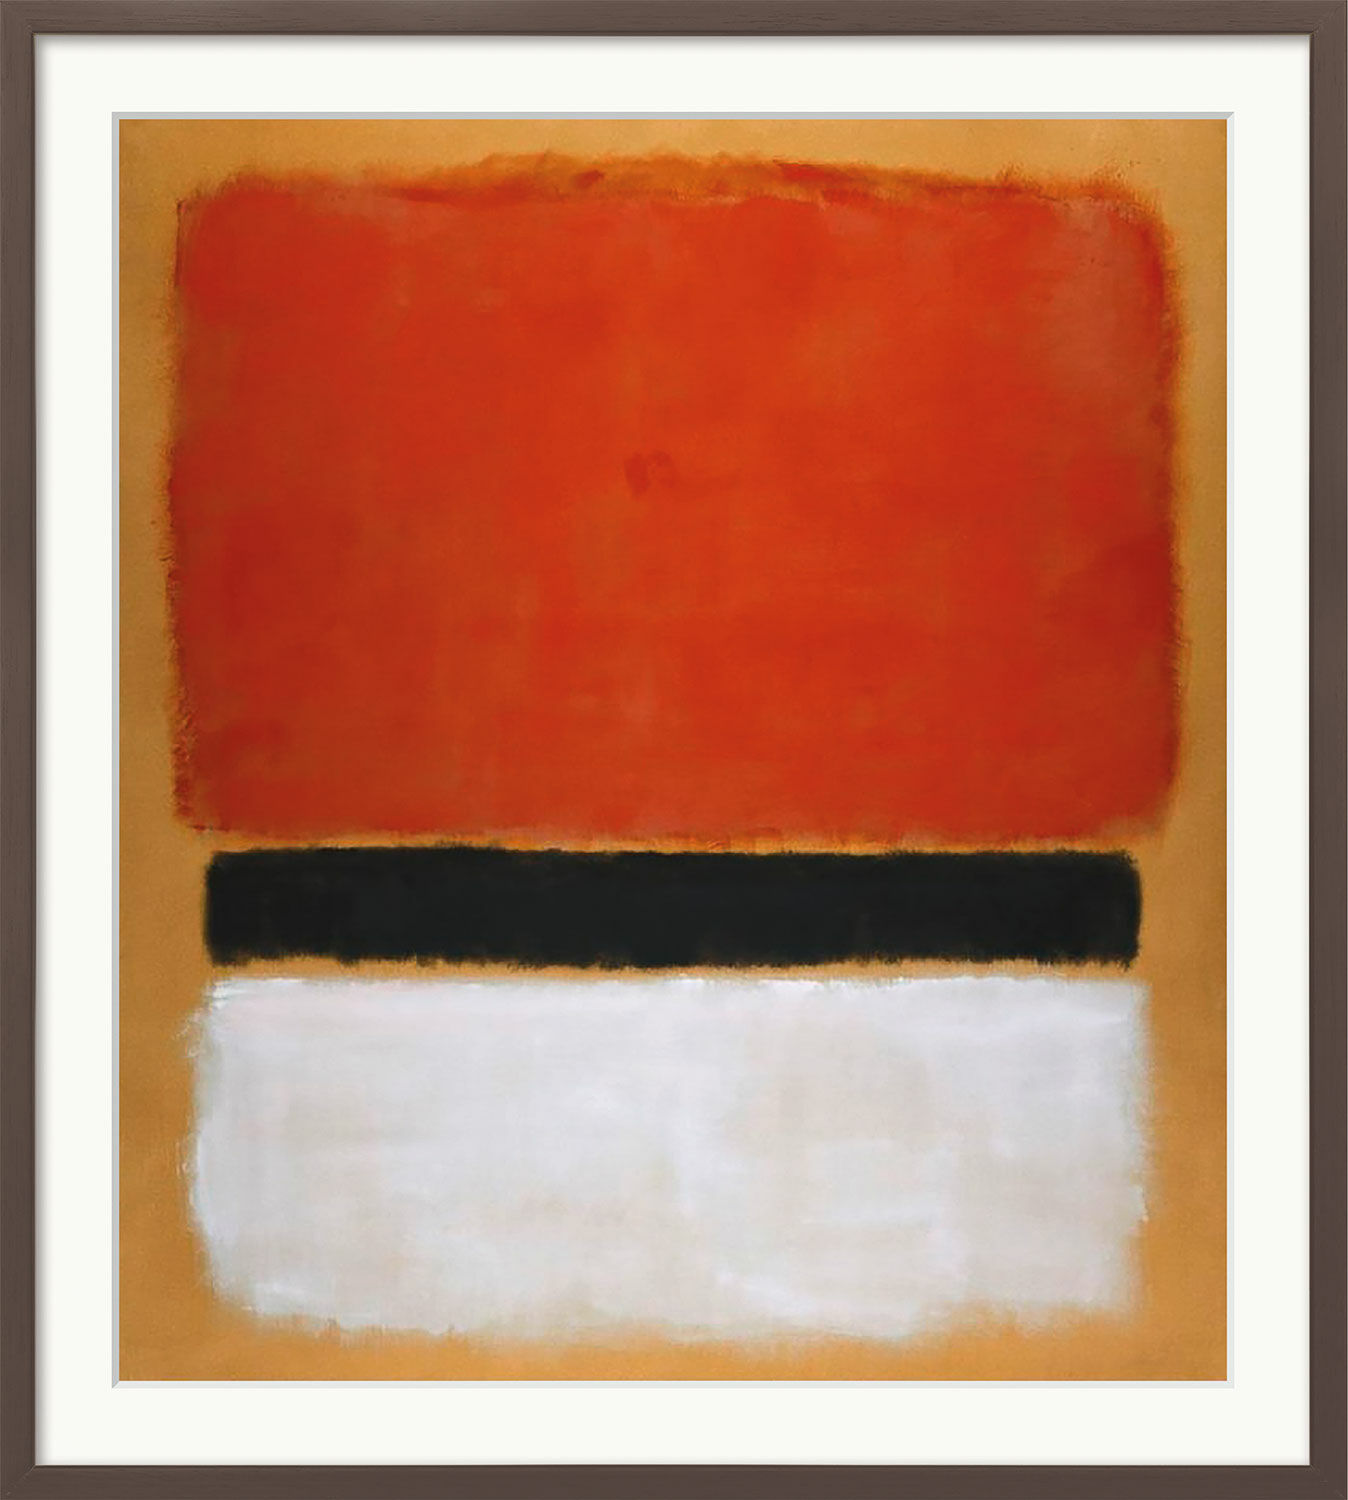 Picture "Untitled (Red, Black, White on Yellow)" (1955), framed by Mark Rothko